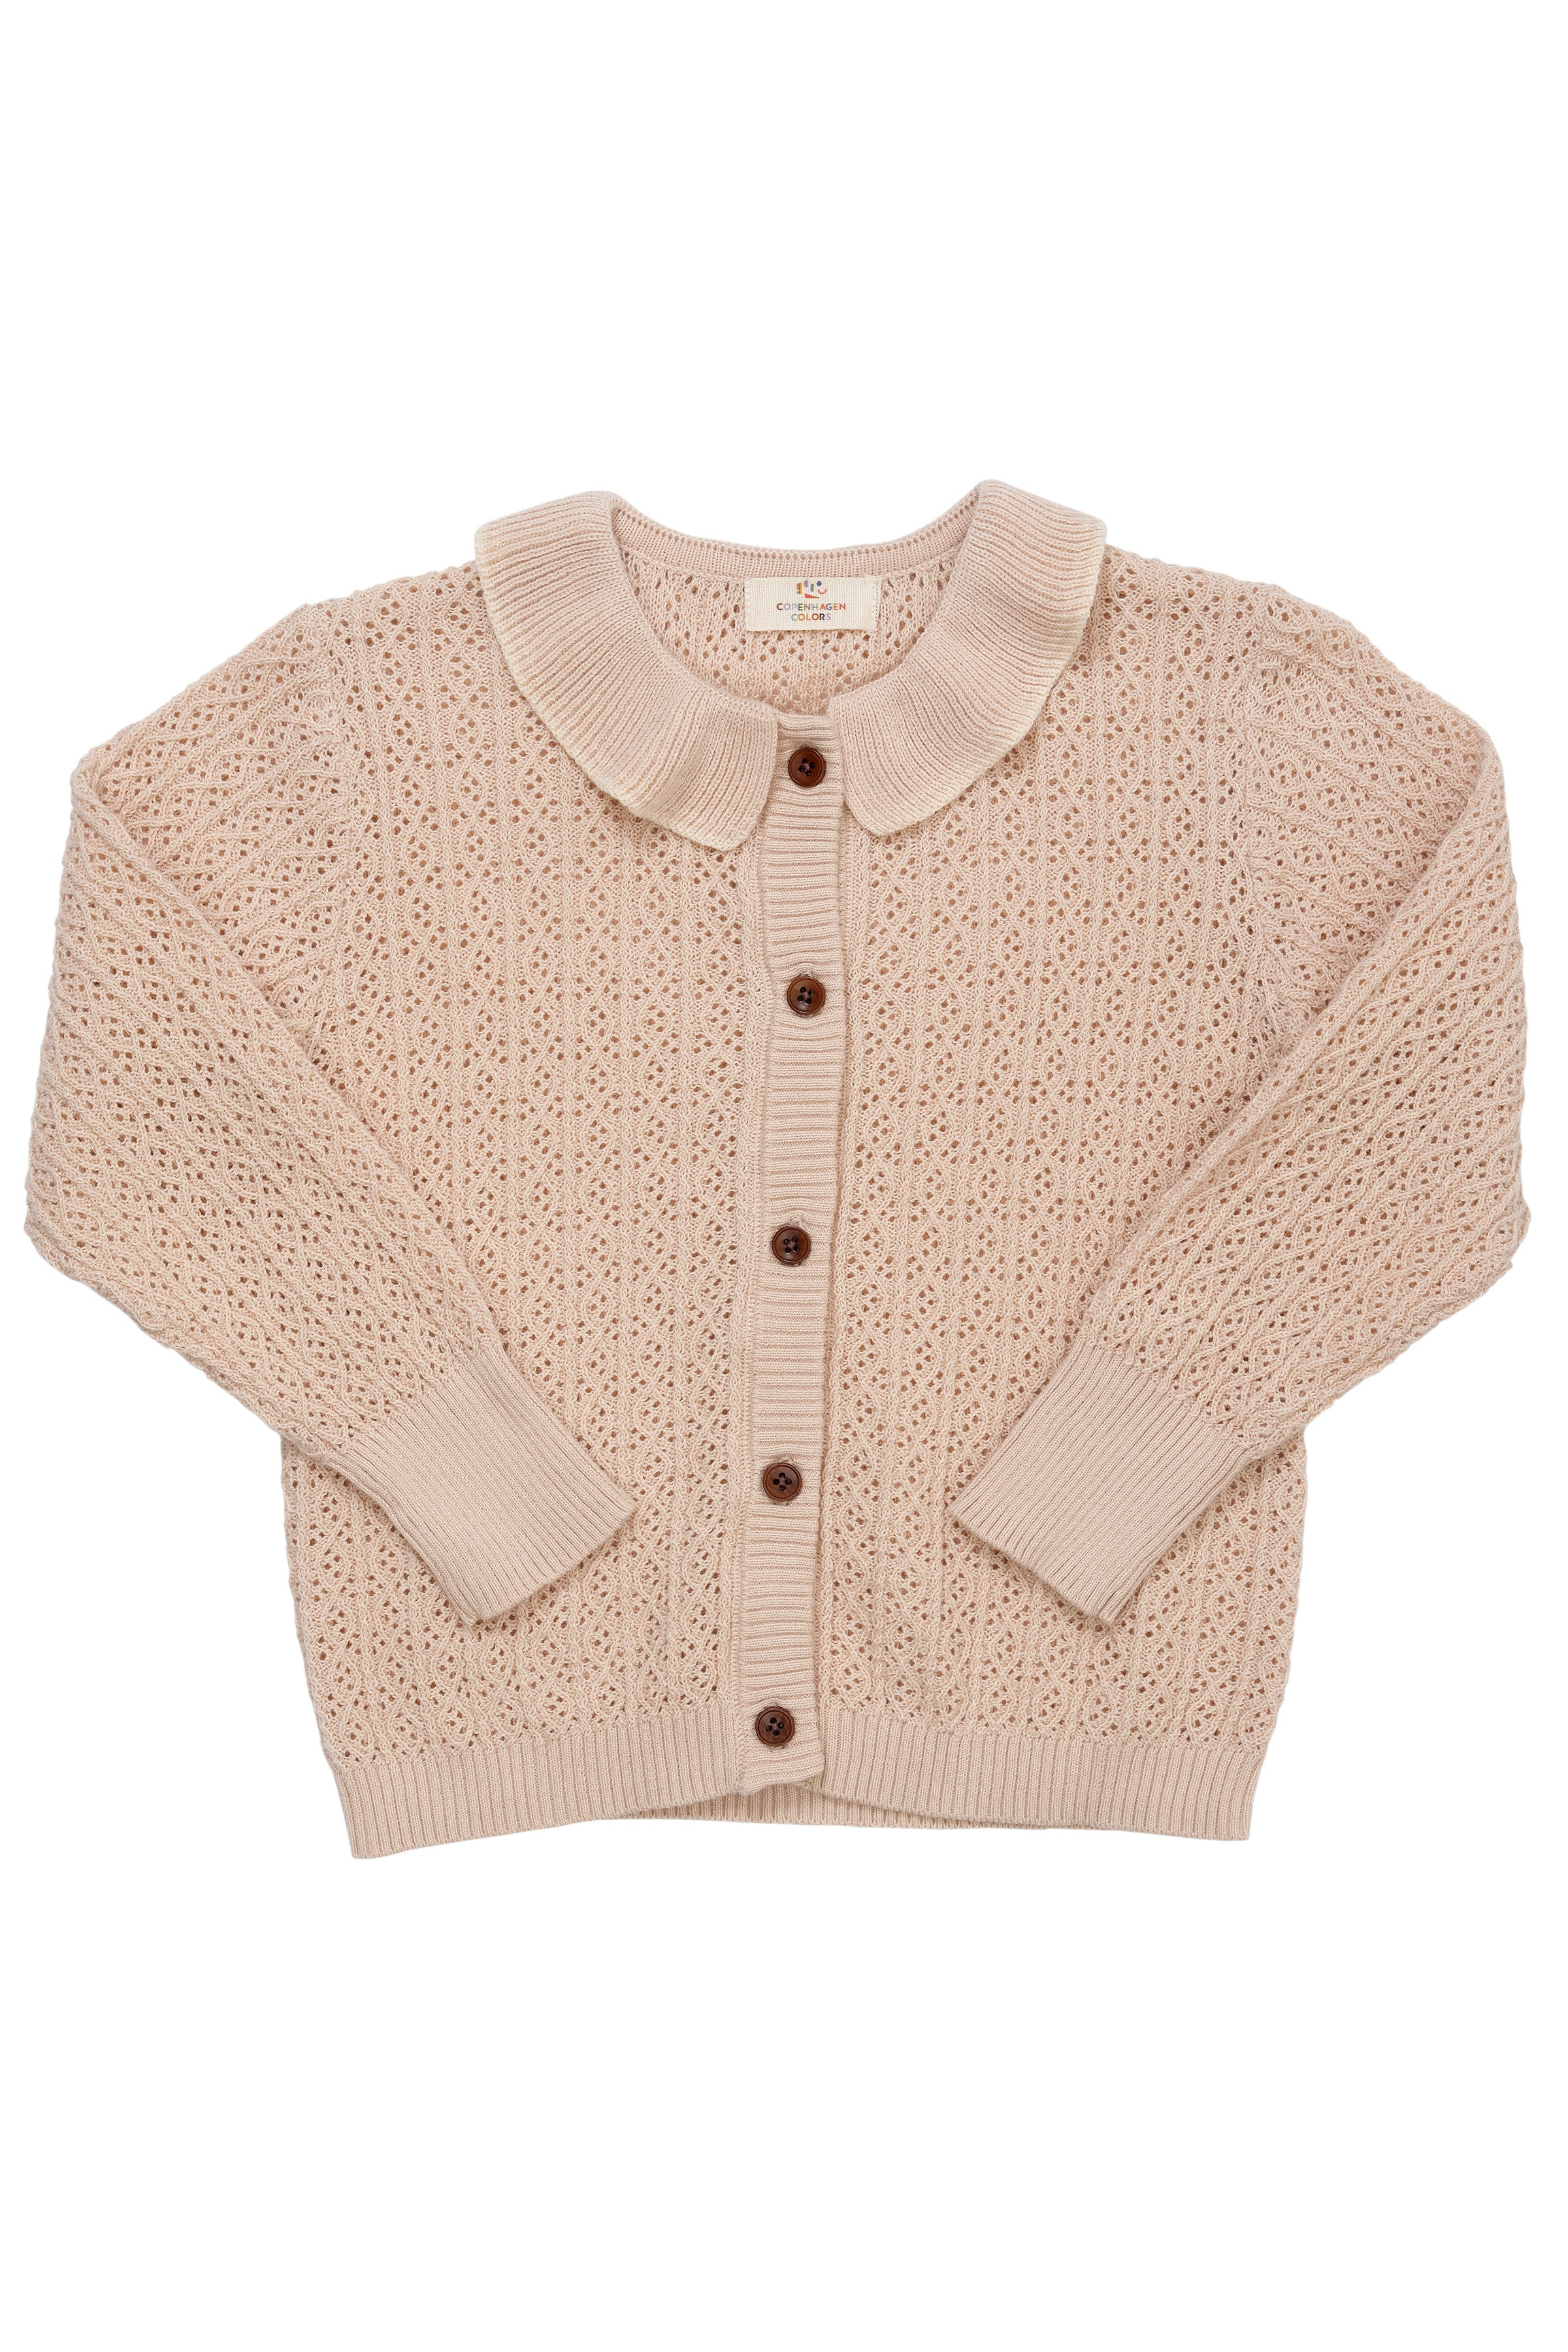 COPENHAGEN COLORS / POINTELLE KNITTED CABLE CARDIGAN - SAND/CREME